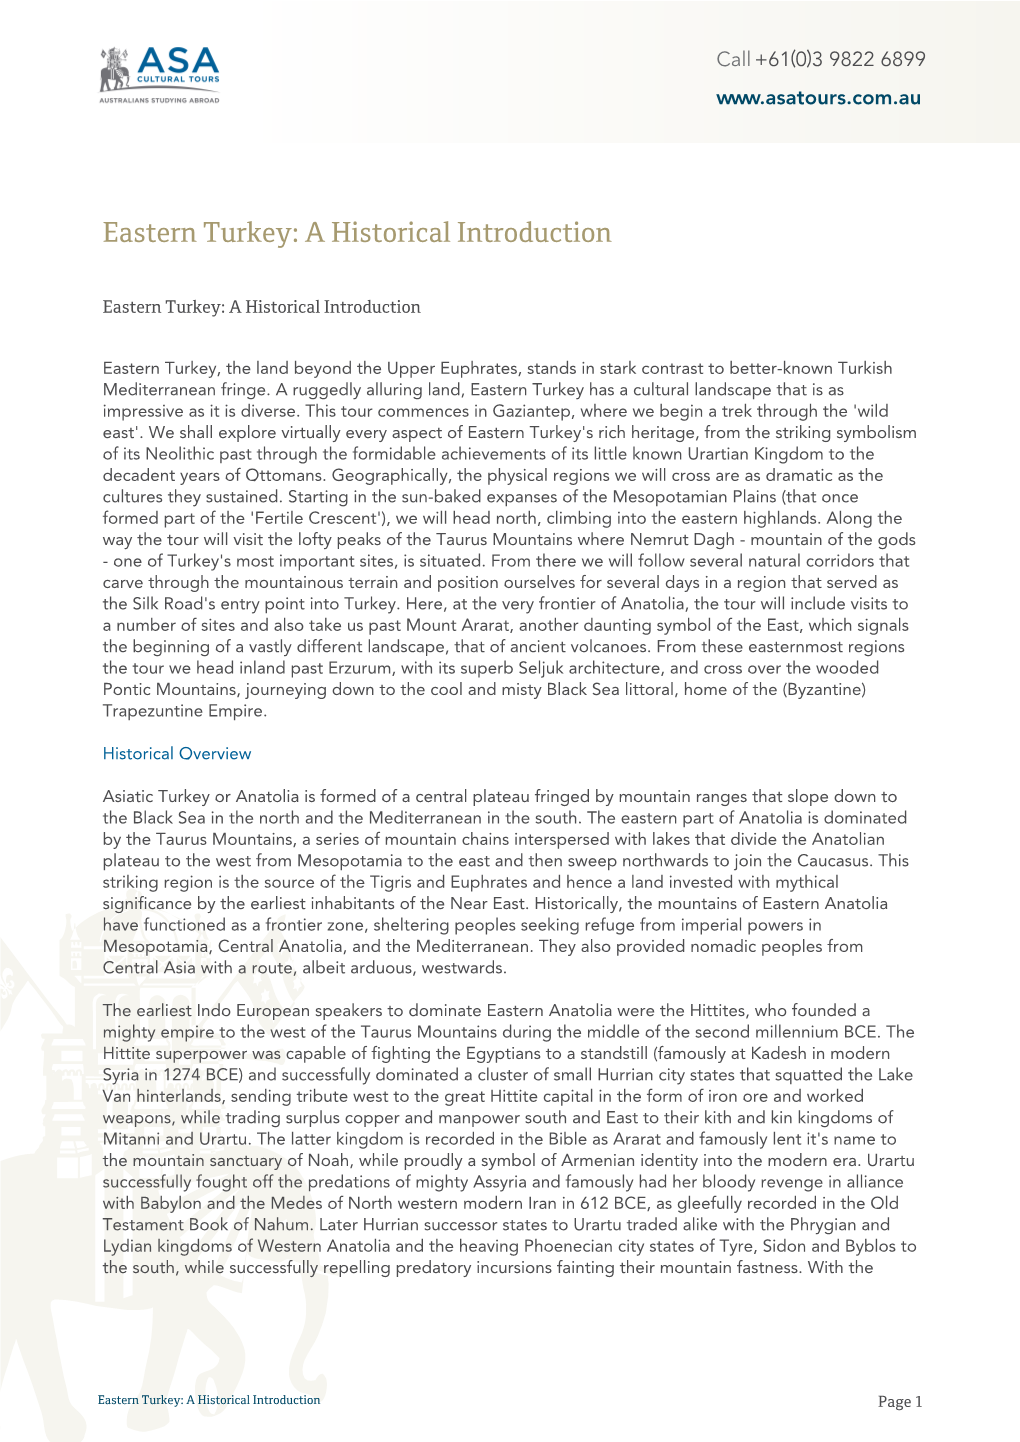 Eastern Turkey: a Historical Introduction